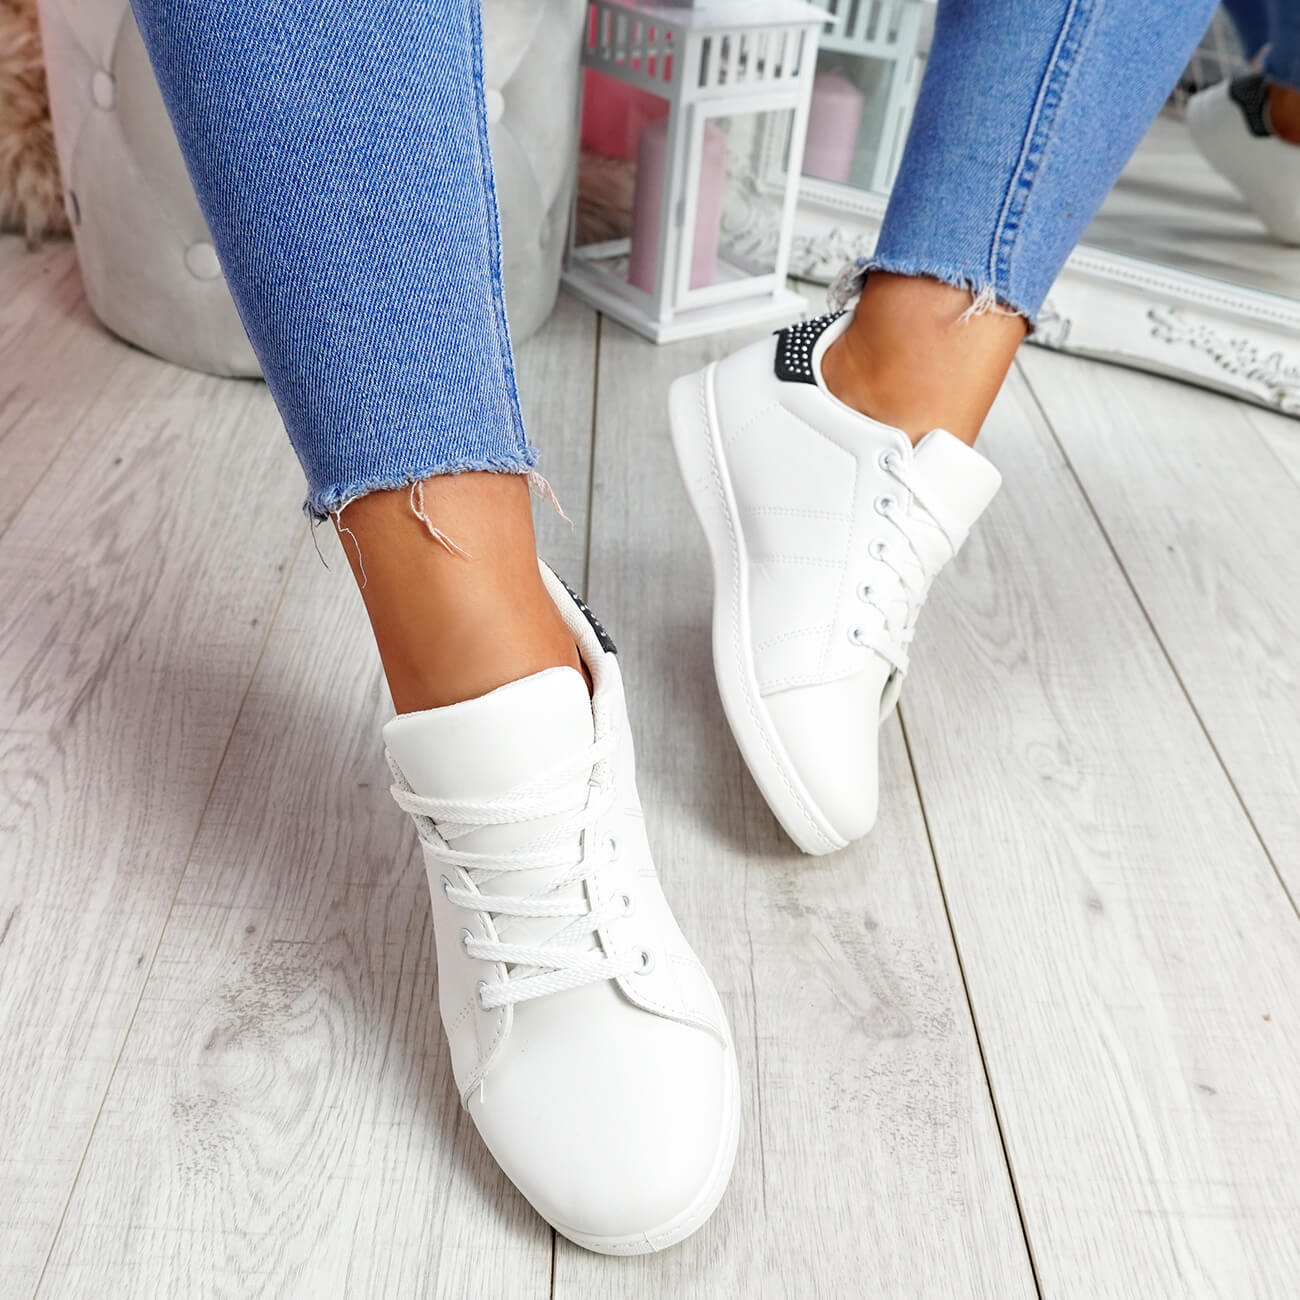 WOMENS LADIES LACE UP STUDDED PLIMSOLLS FLAT TRAINERS SNEAKERS PARTY ...